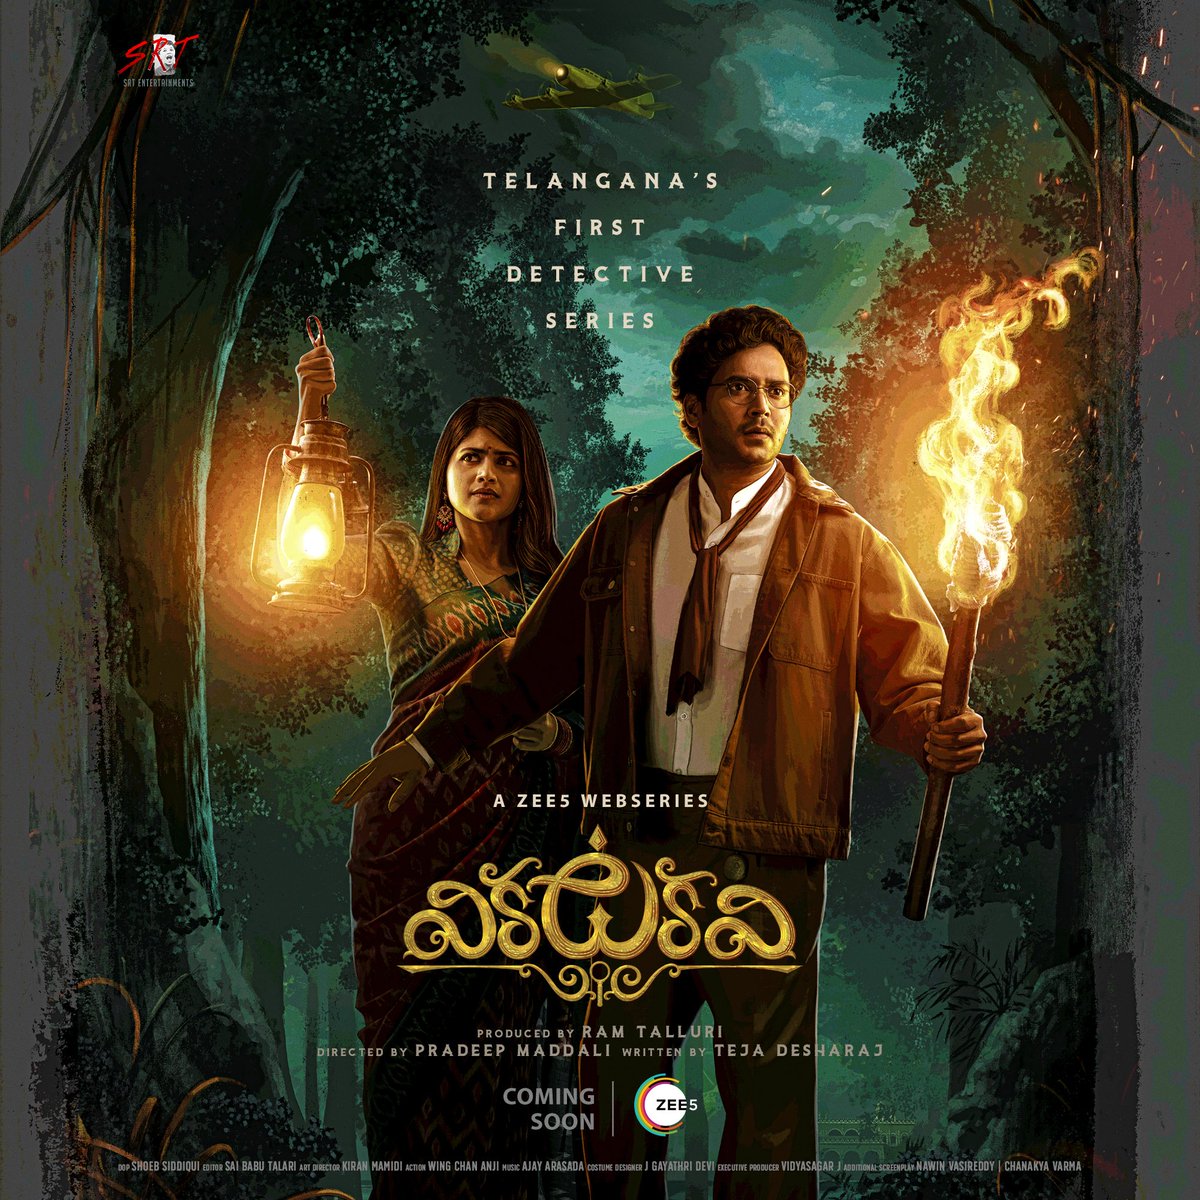 📢 Ugadi special Announcement Alert📢: Step into the intriguing world of 'Vikkatakavi,' the first Telangana-based detective series! Join Detective Ramakrishna as he unravels the secrets of the cursed village of 'Amaragiri' in the Nallamalla forest.